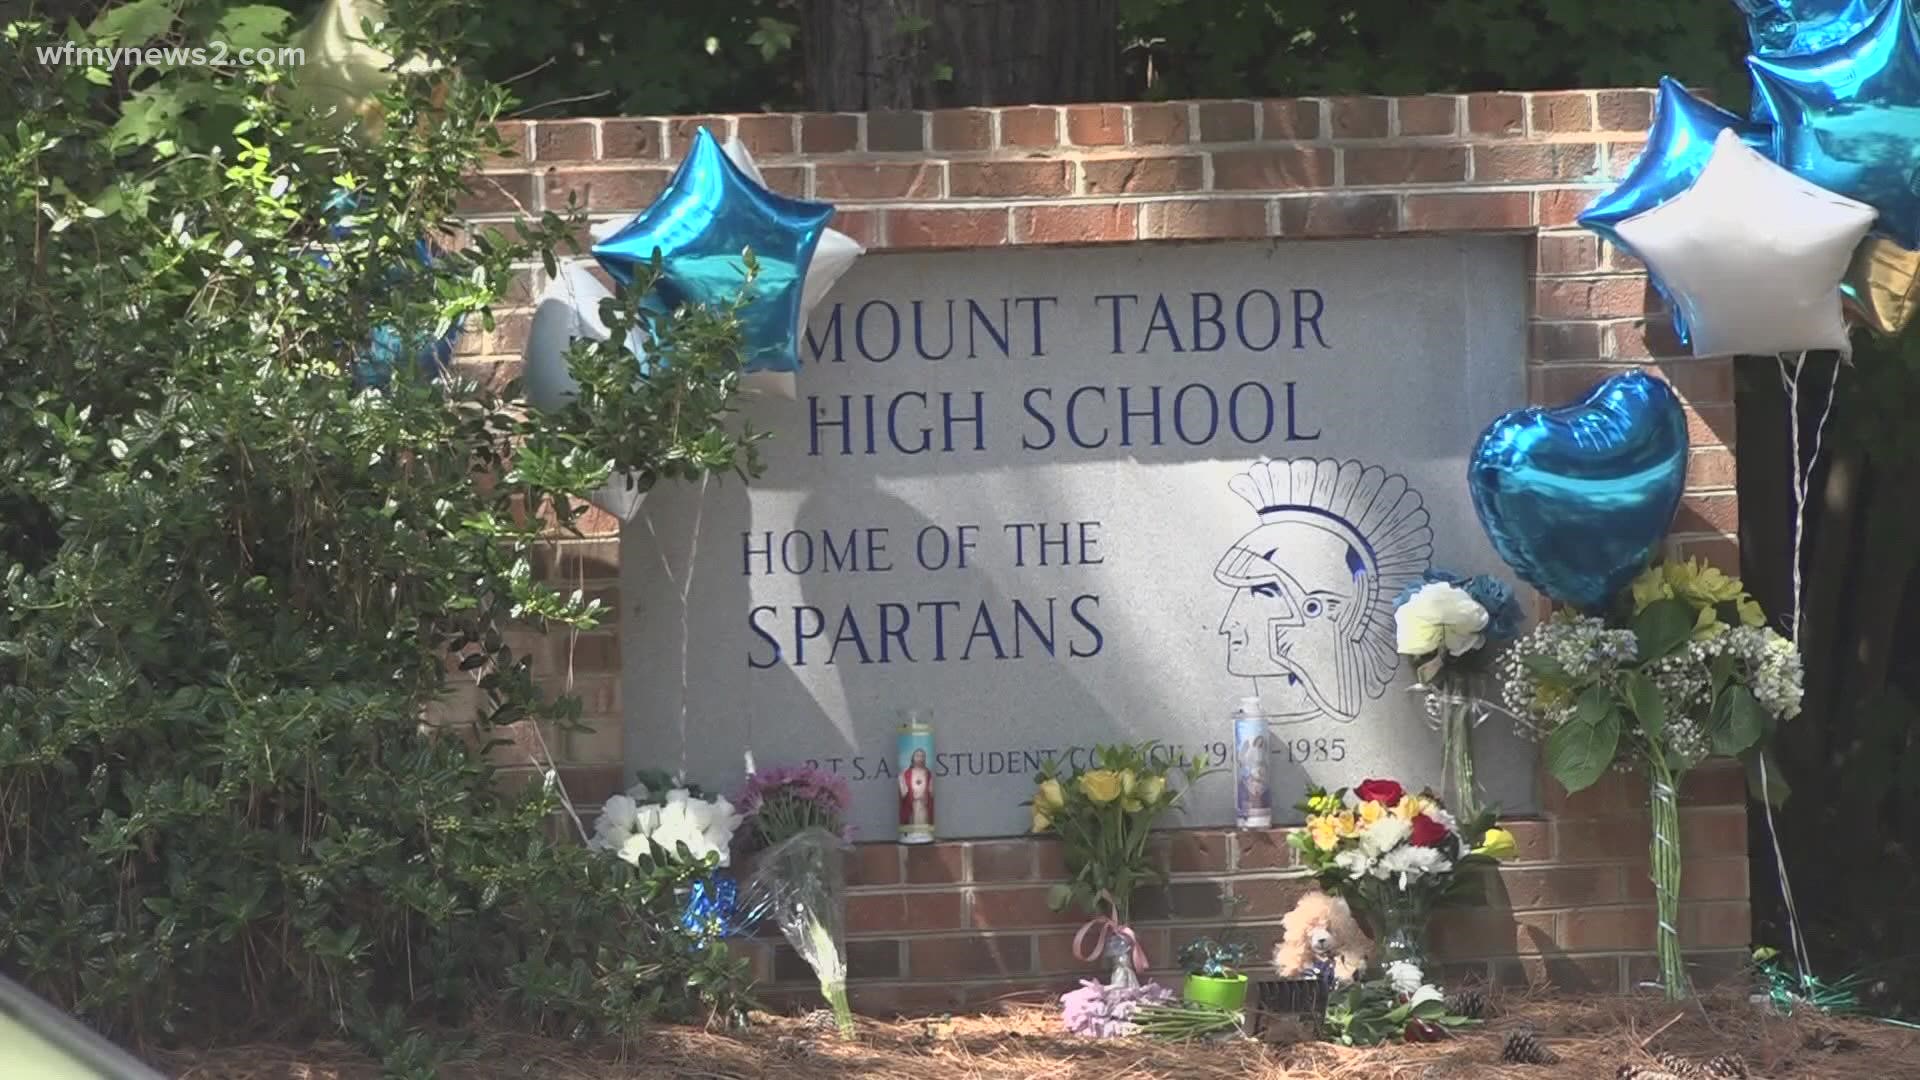 Students will be back in the classroom for the first time Tuesday, less than a week after a deadly shooting on school grounds.